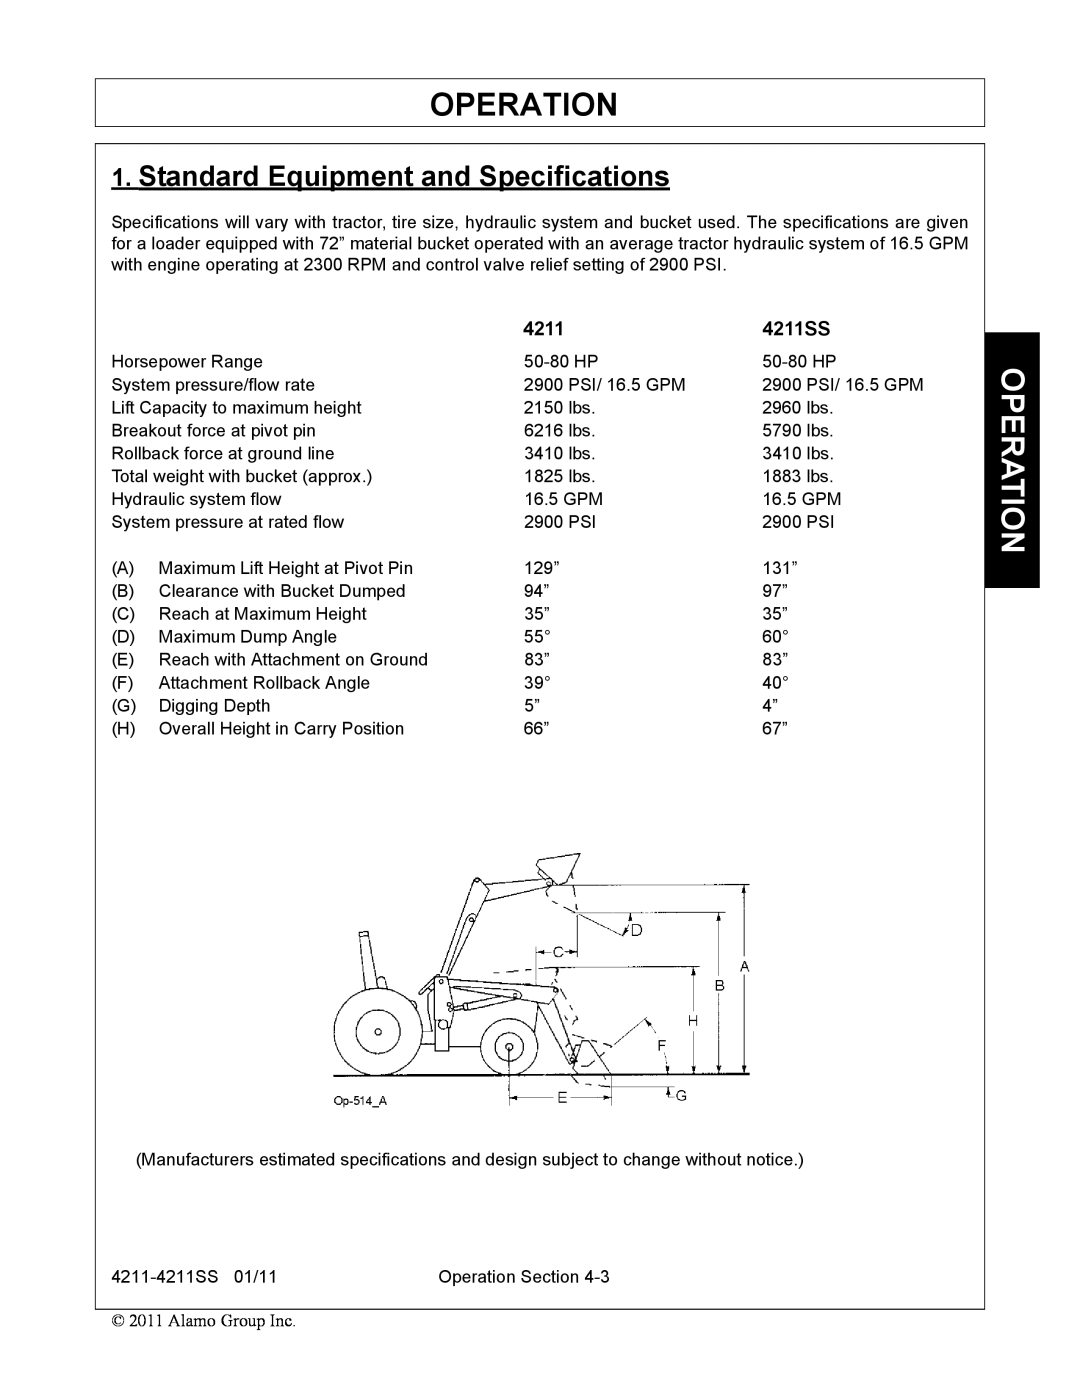 Servis-Rhino manual Operation, Standard Equipment and Specifications, 4211SS 